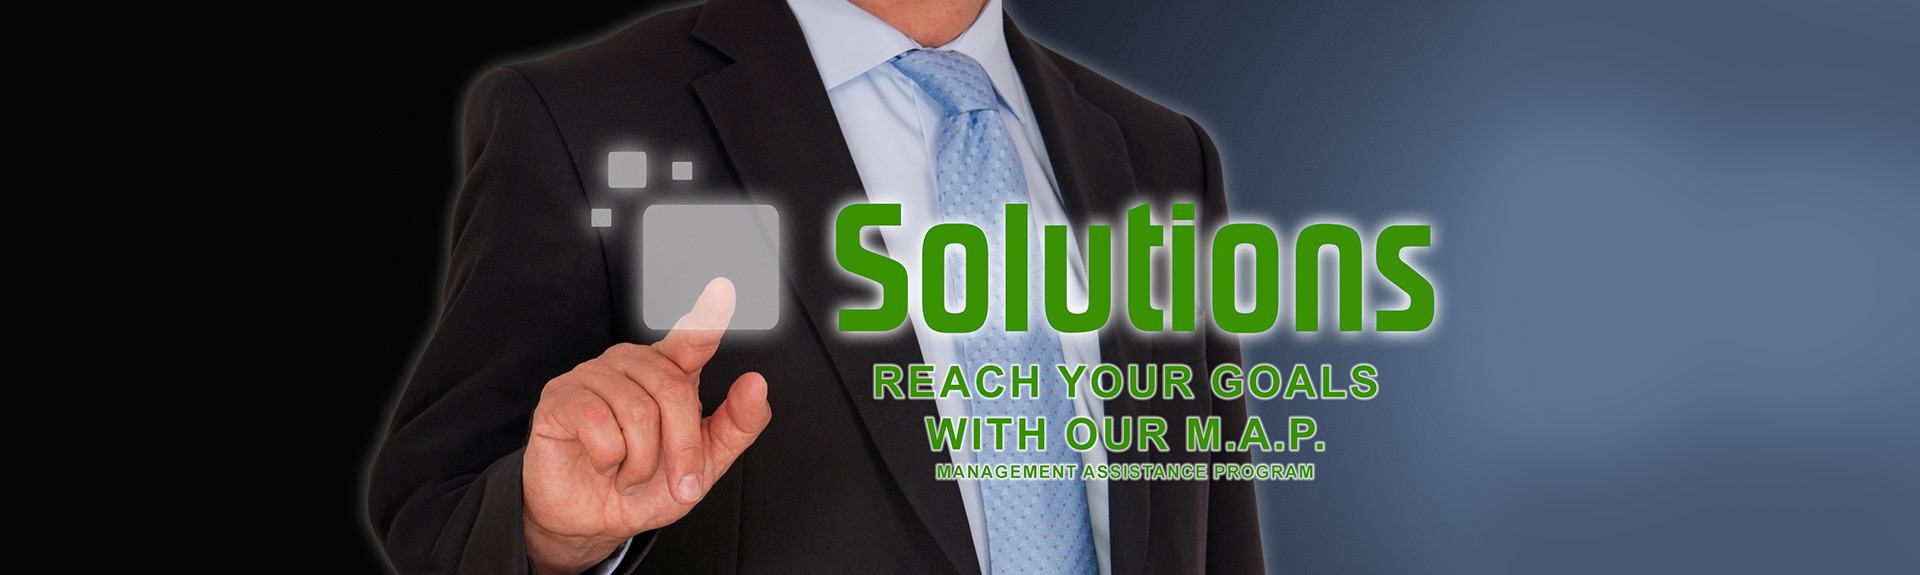 my solutions insight header image 4